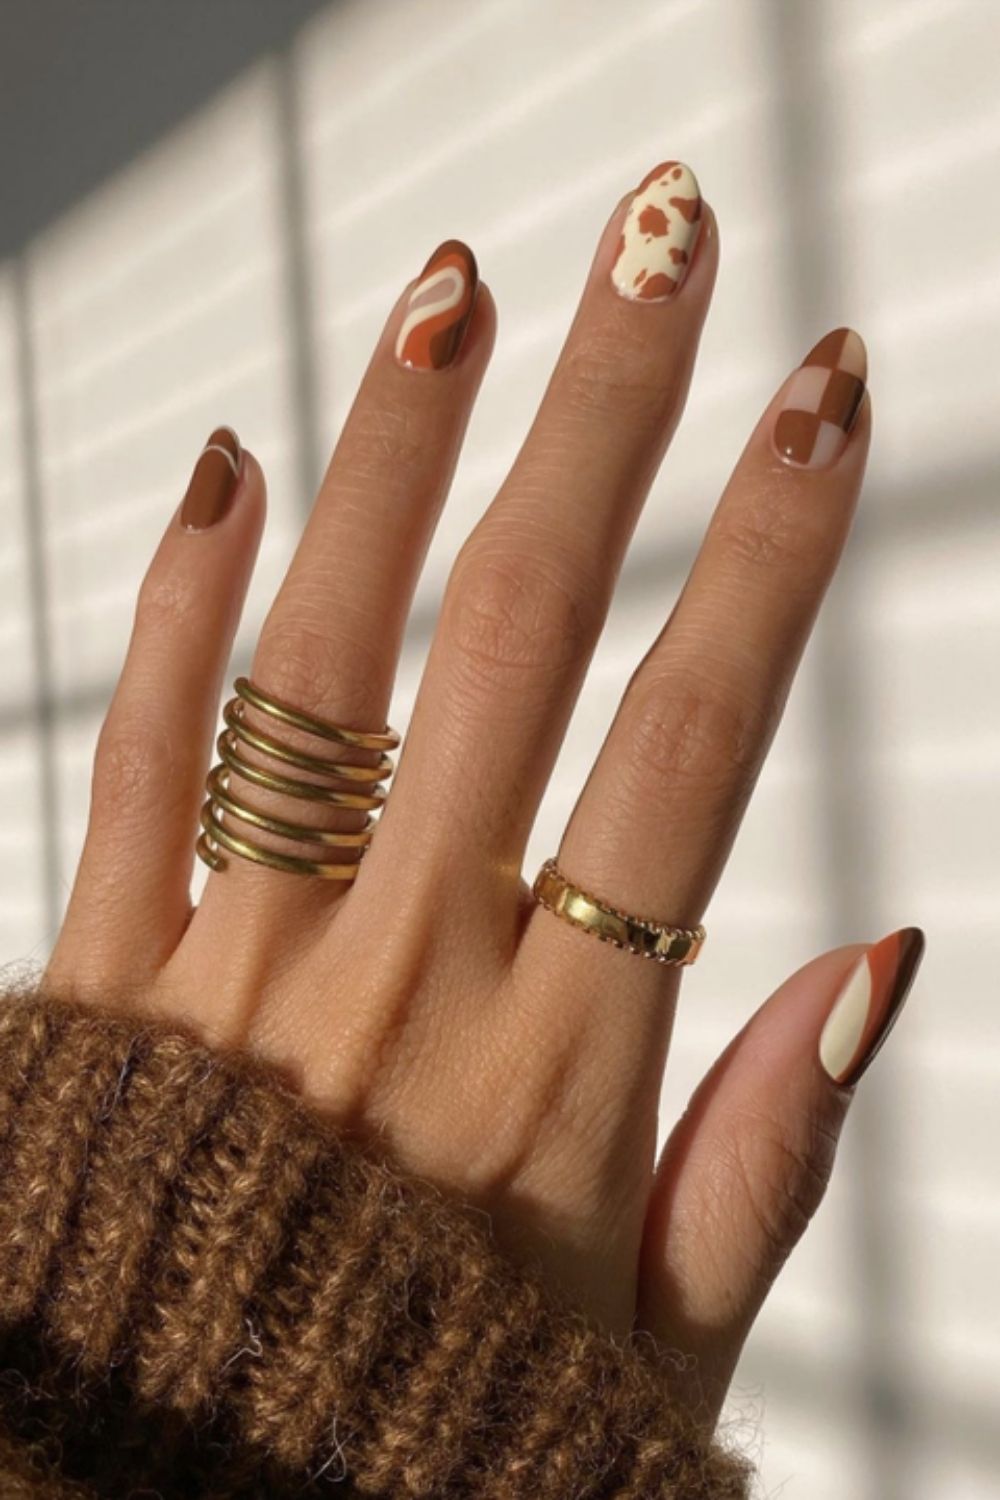 DIY alert! Trendy nail art ideas to try at home this month